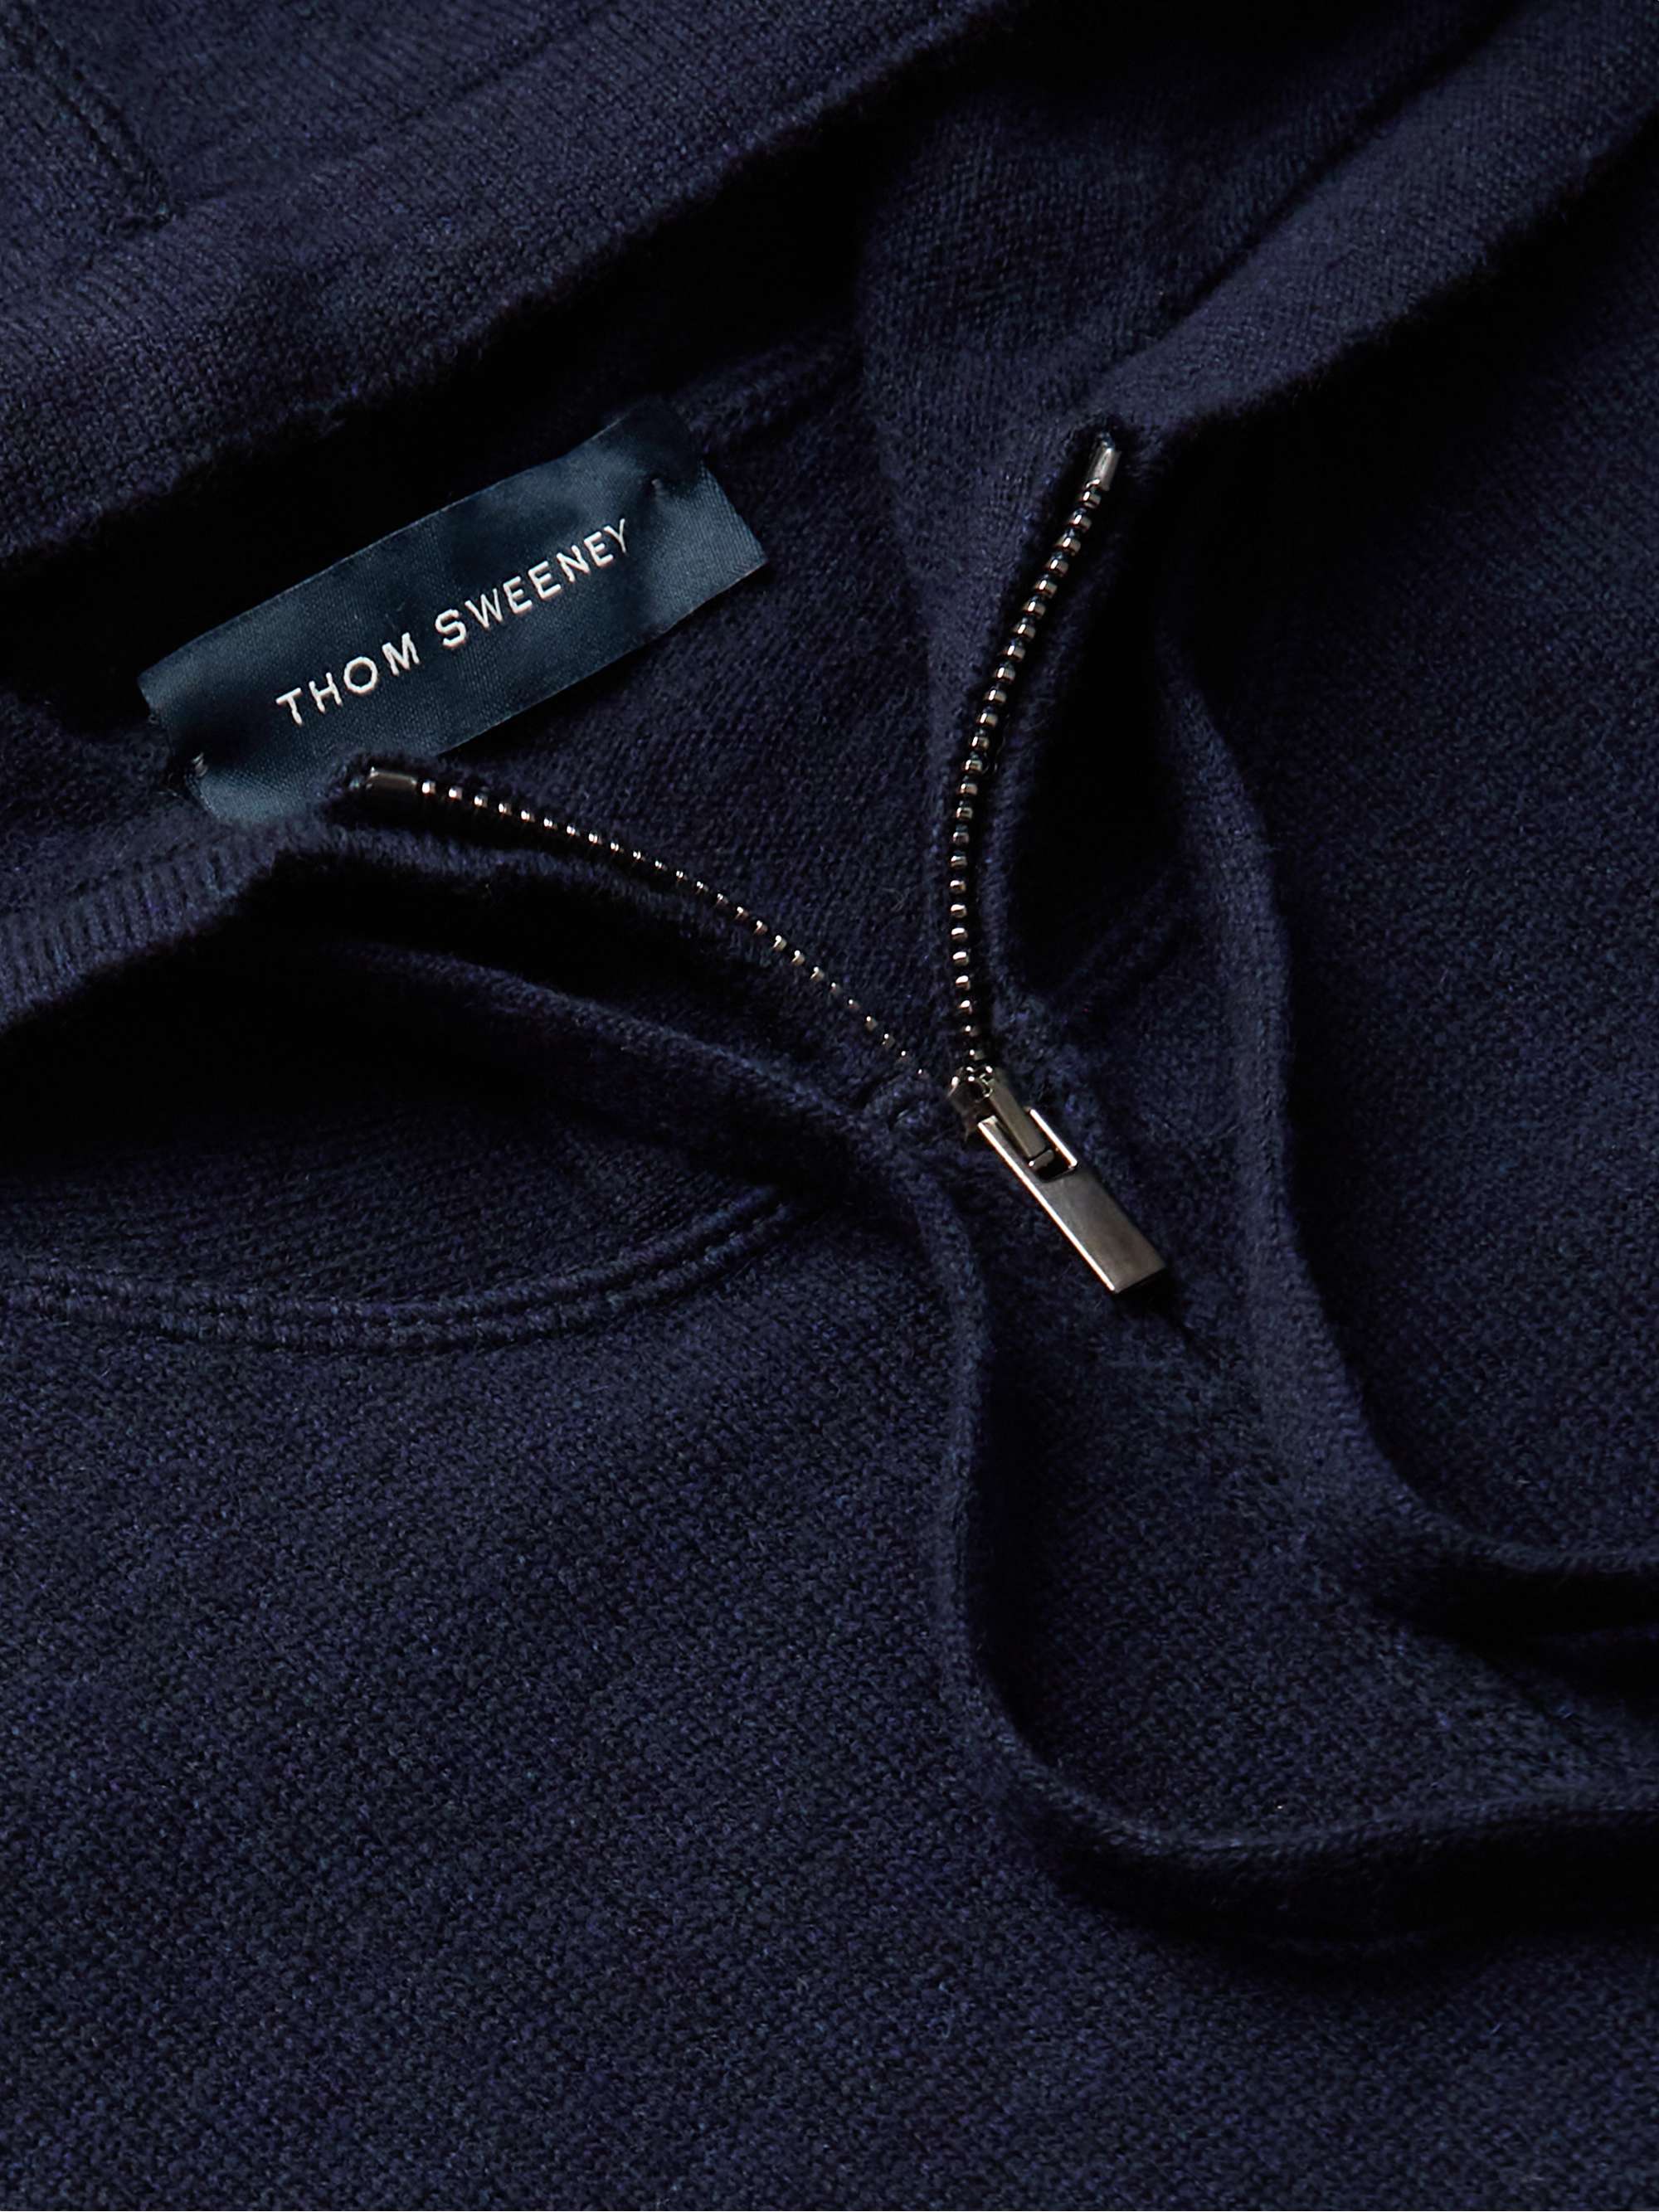 THOM SWEENEY Wool and Cashmere-Blend Zip-Up Hoodie